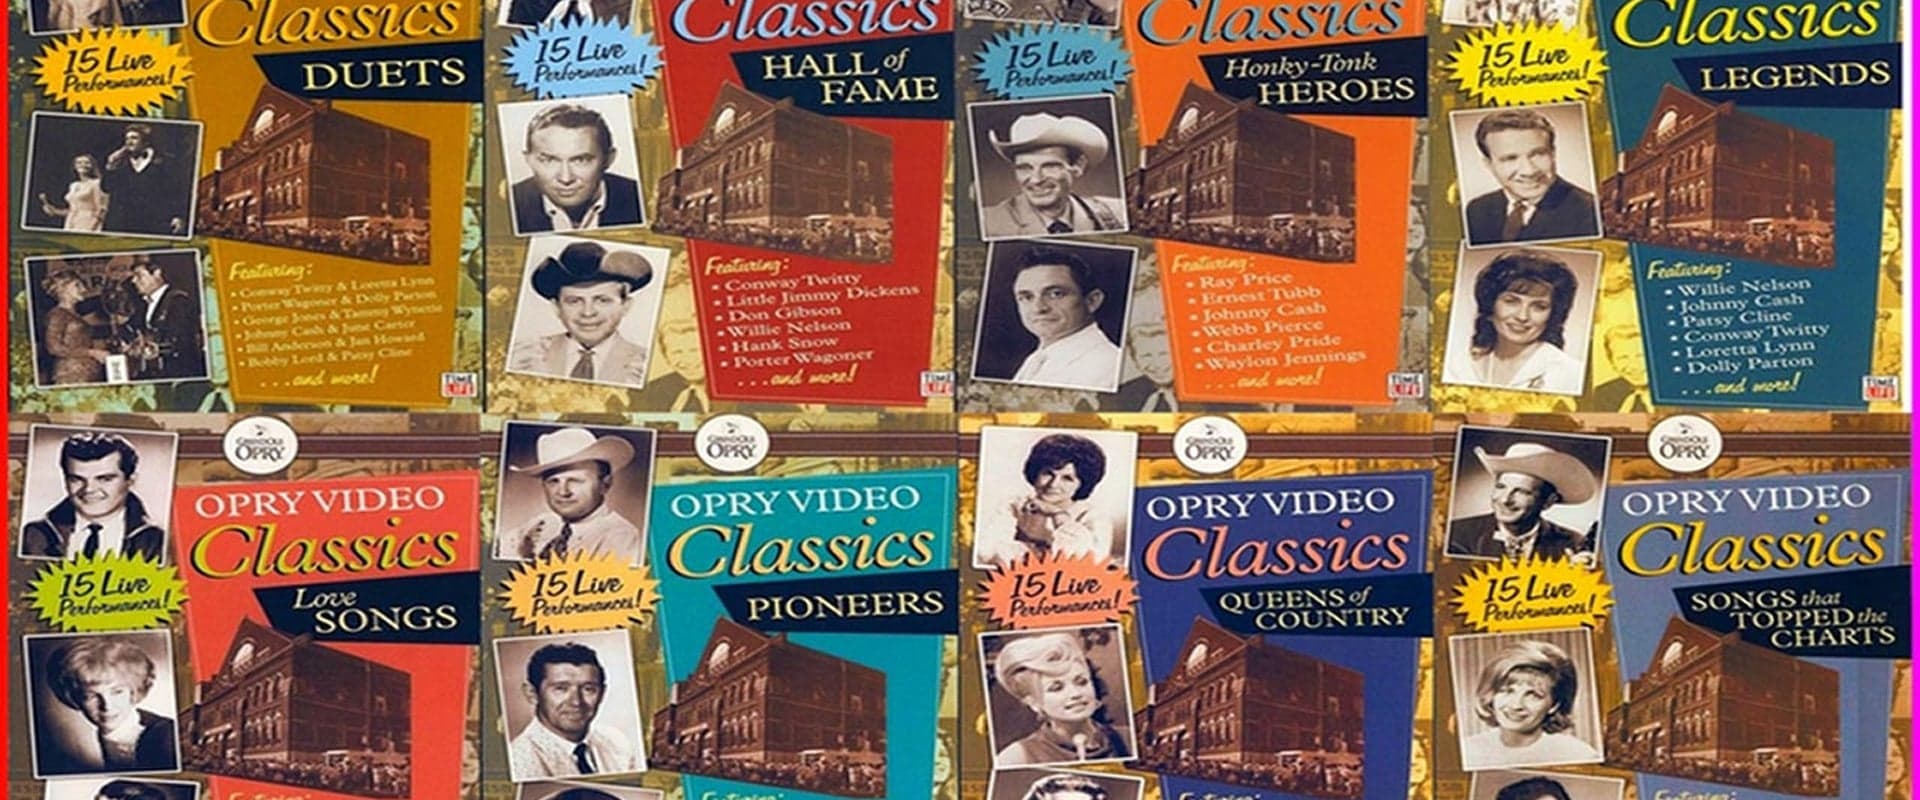 Opry Video Classics: Songs That Topped the Charts